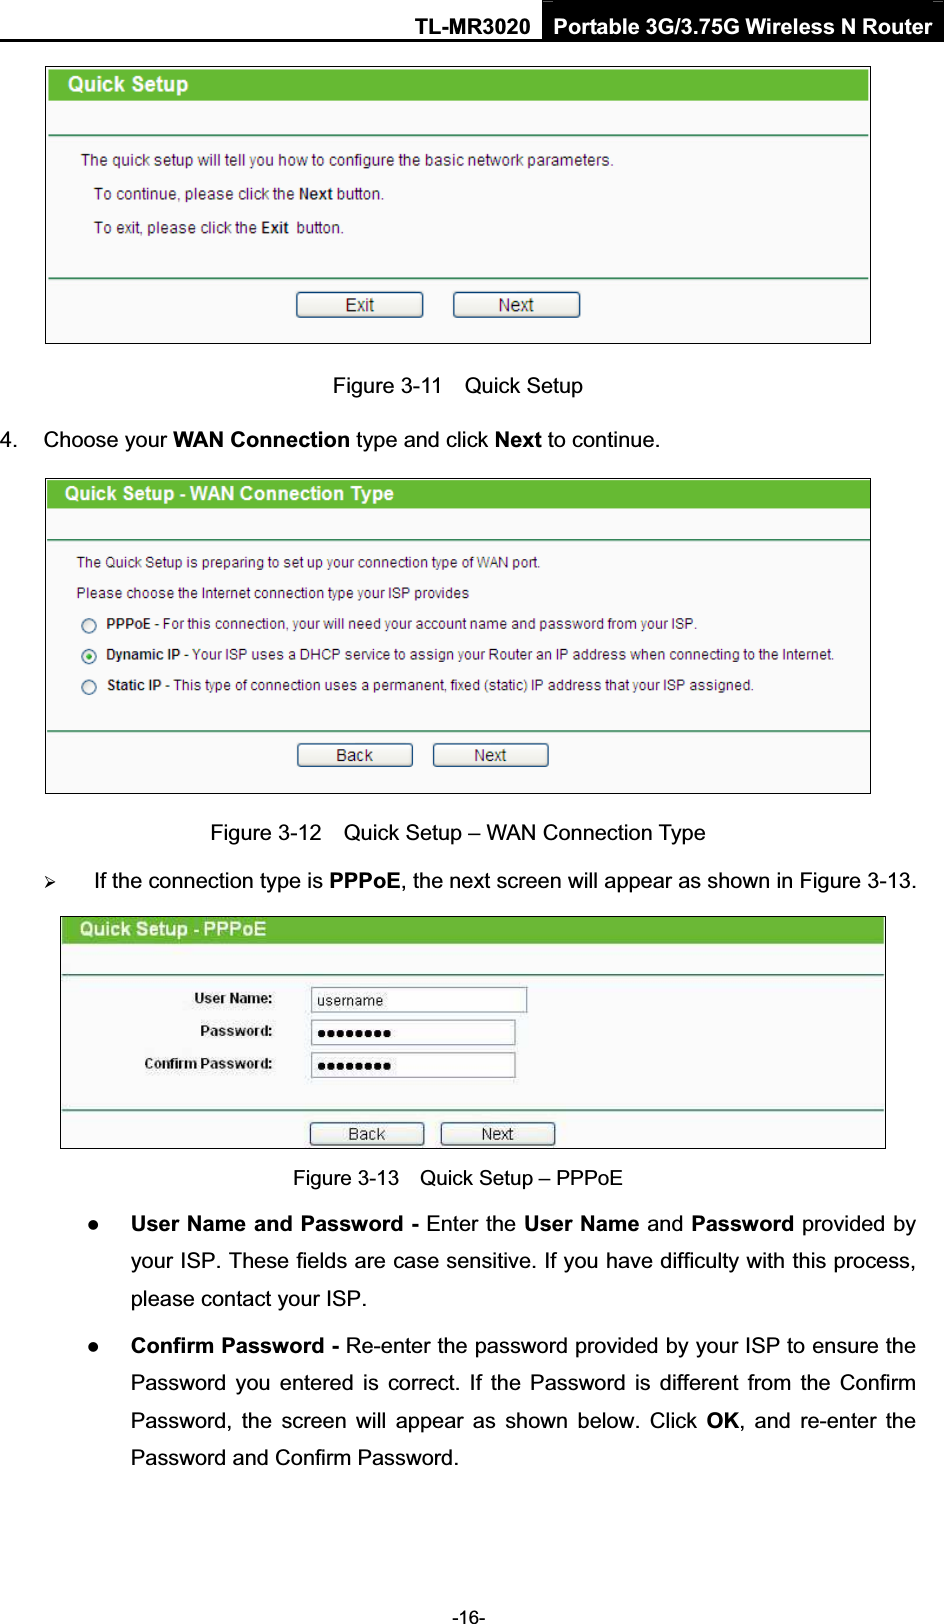 TL-MR3020 Portable 3G/3.75G Wireless N Router-16-Figure 3-11    Quick Setup 4.  Choose your WAN Connection type and click Next to continue. Figure 3-12    Quick Setup – WAN Connection Type ¾If the connection type is PPPoE, the next screen will appear as shown in Figure 3-13. Figure 3-13    Quick Setup – PPPoE zUser Name and Password - Enter the User Name and Password provided by your ISP. These fields are case sensitive. If you have difficulty with this process, please contact your ISP. zConfirm Password - Re-enter the password provided by your ISP to ensure the Password  you  entered  is  correct.  If  the  Password  is  different  from  the  Confirm Password,  the  screen  will  appear  as  shown  below.  Click  OK,  and  re-enter  the Password and Confirm Password. 